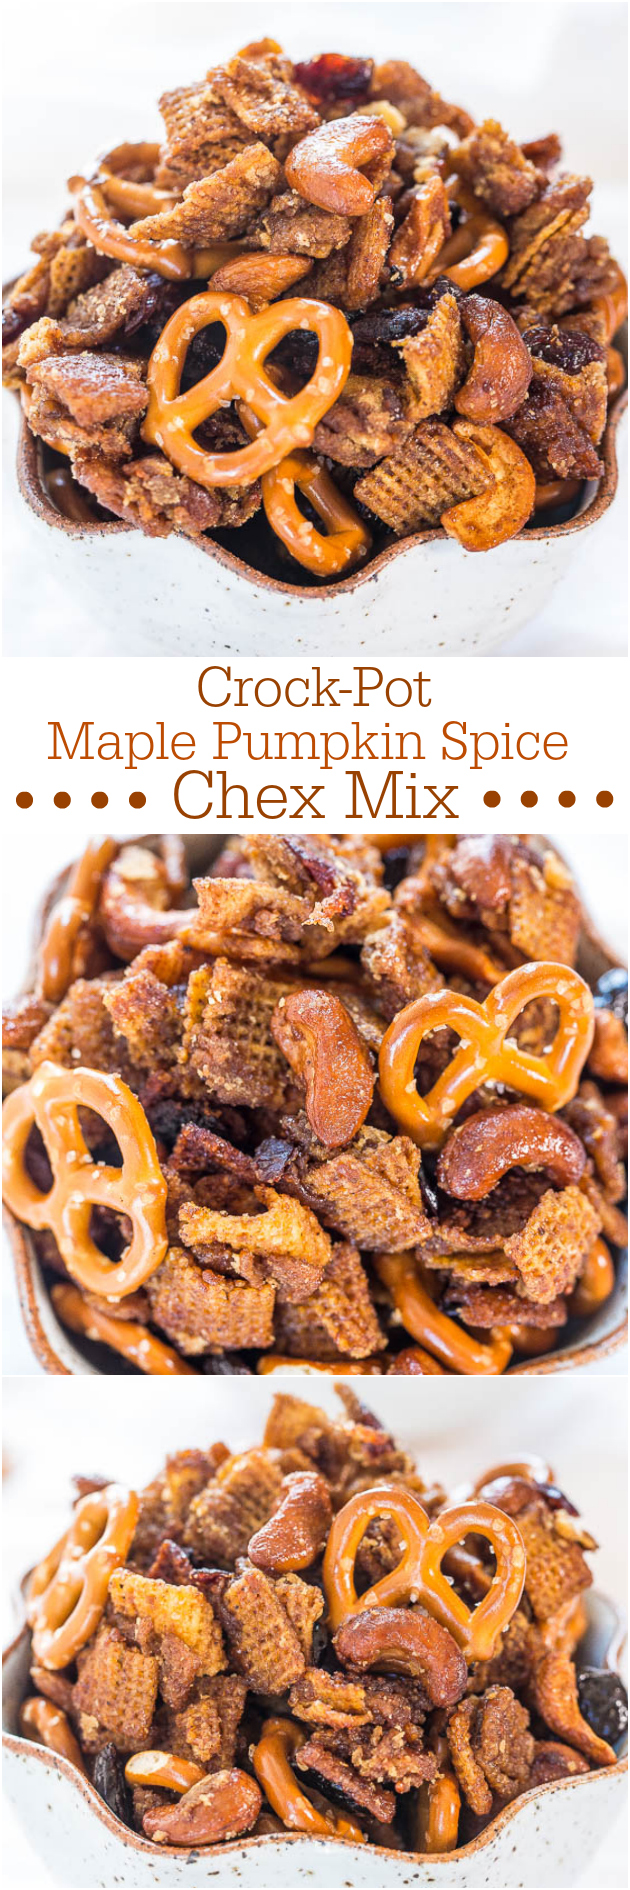 Crock-Pot Maple Pumpkin Spice Chex Mix - Loaded with fall flavors and made in a Crock-Pot! Wayyy too easy and totally irresistible!!!